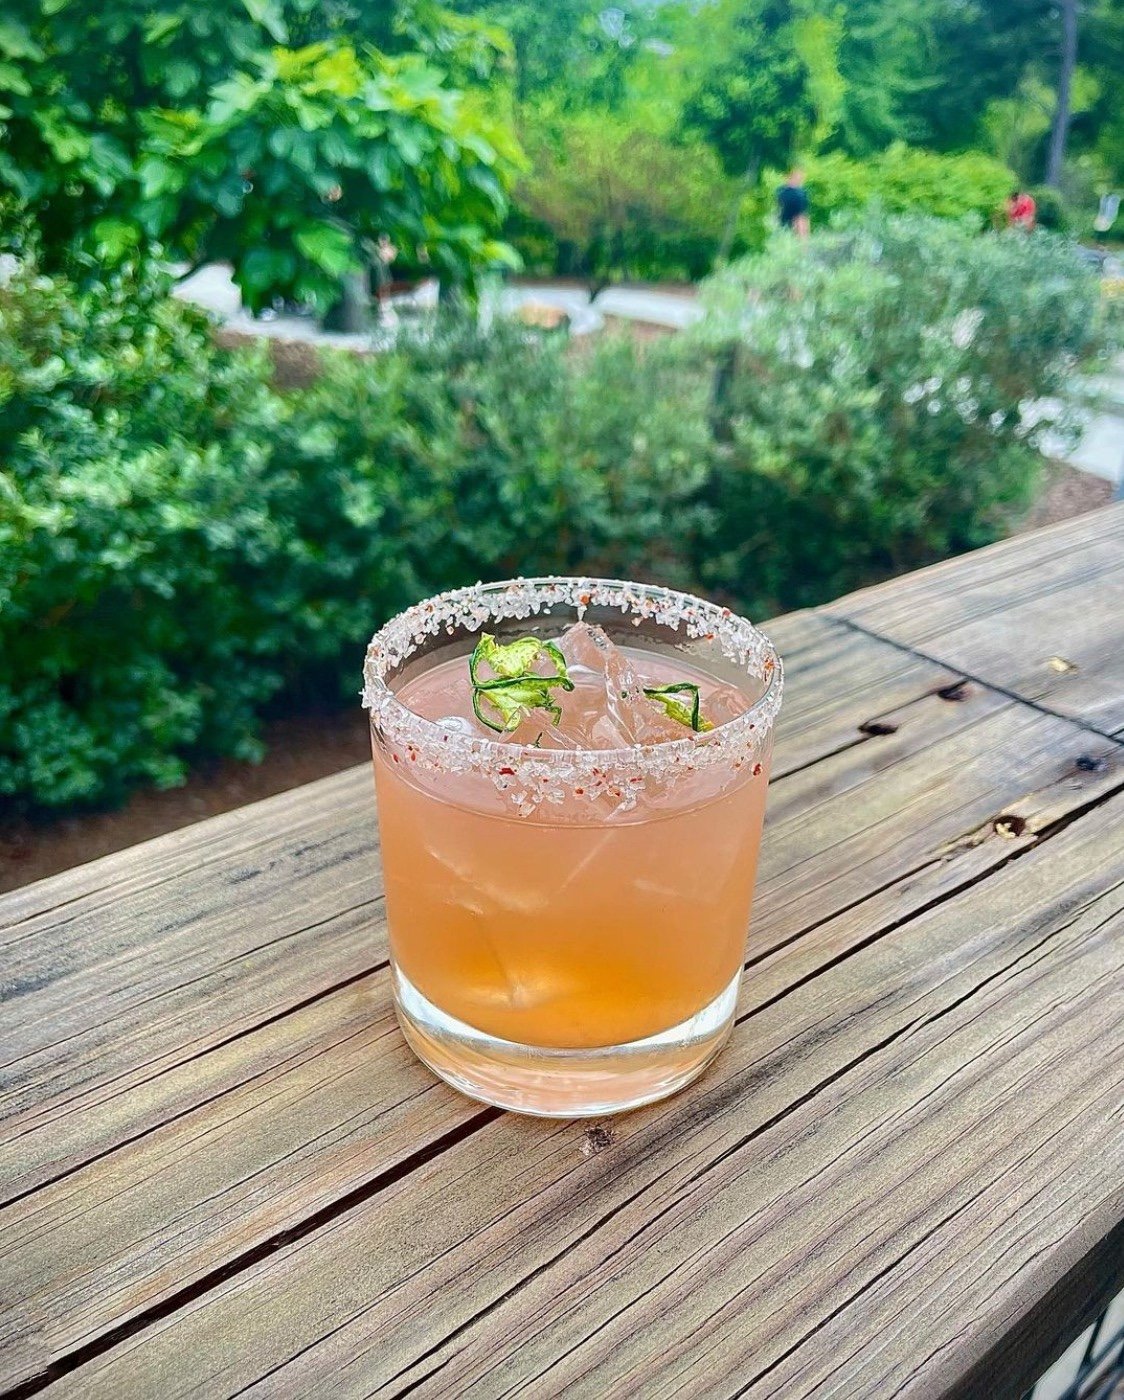 Head over to @asw.exchange this weekend for our brand new spicy marg, Strawberry Fields for Now 🍓 &ndash; pairs great with both an awesome @senpainoodlesupply pop-up tonight and Jazz on Sunday.

Jalape&ntilde;o-infused Bustletown Vodka, a little of 